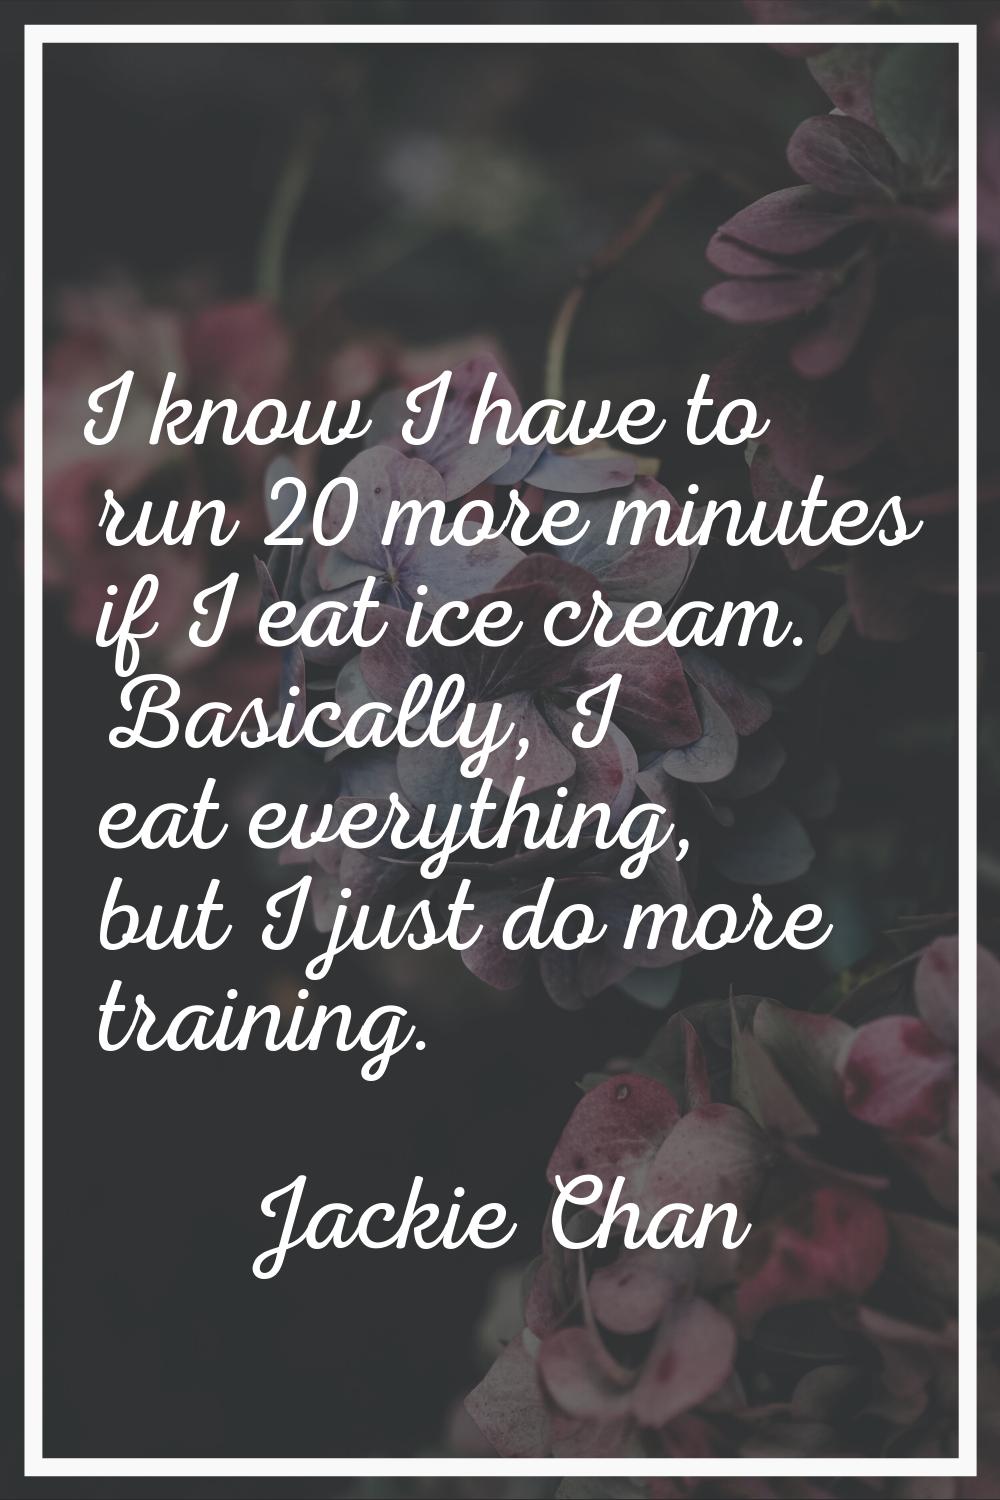 I know I have to run 20 more minutes if I eat ice cream. Basically, I eat everything, but I just do